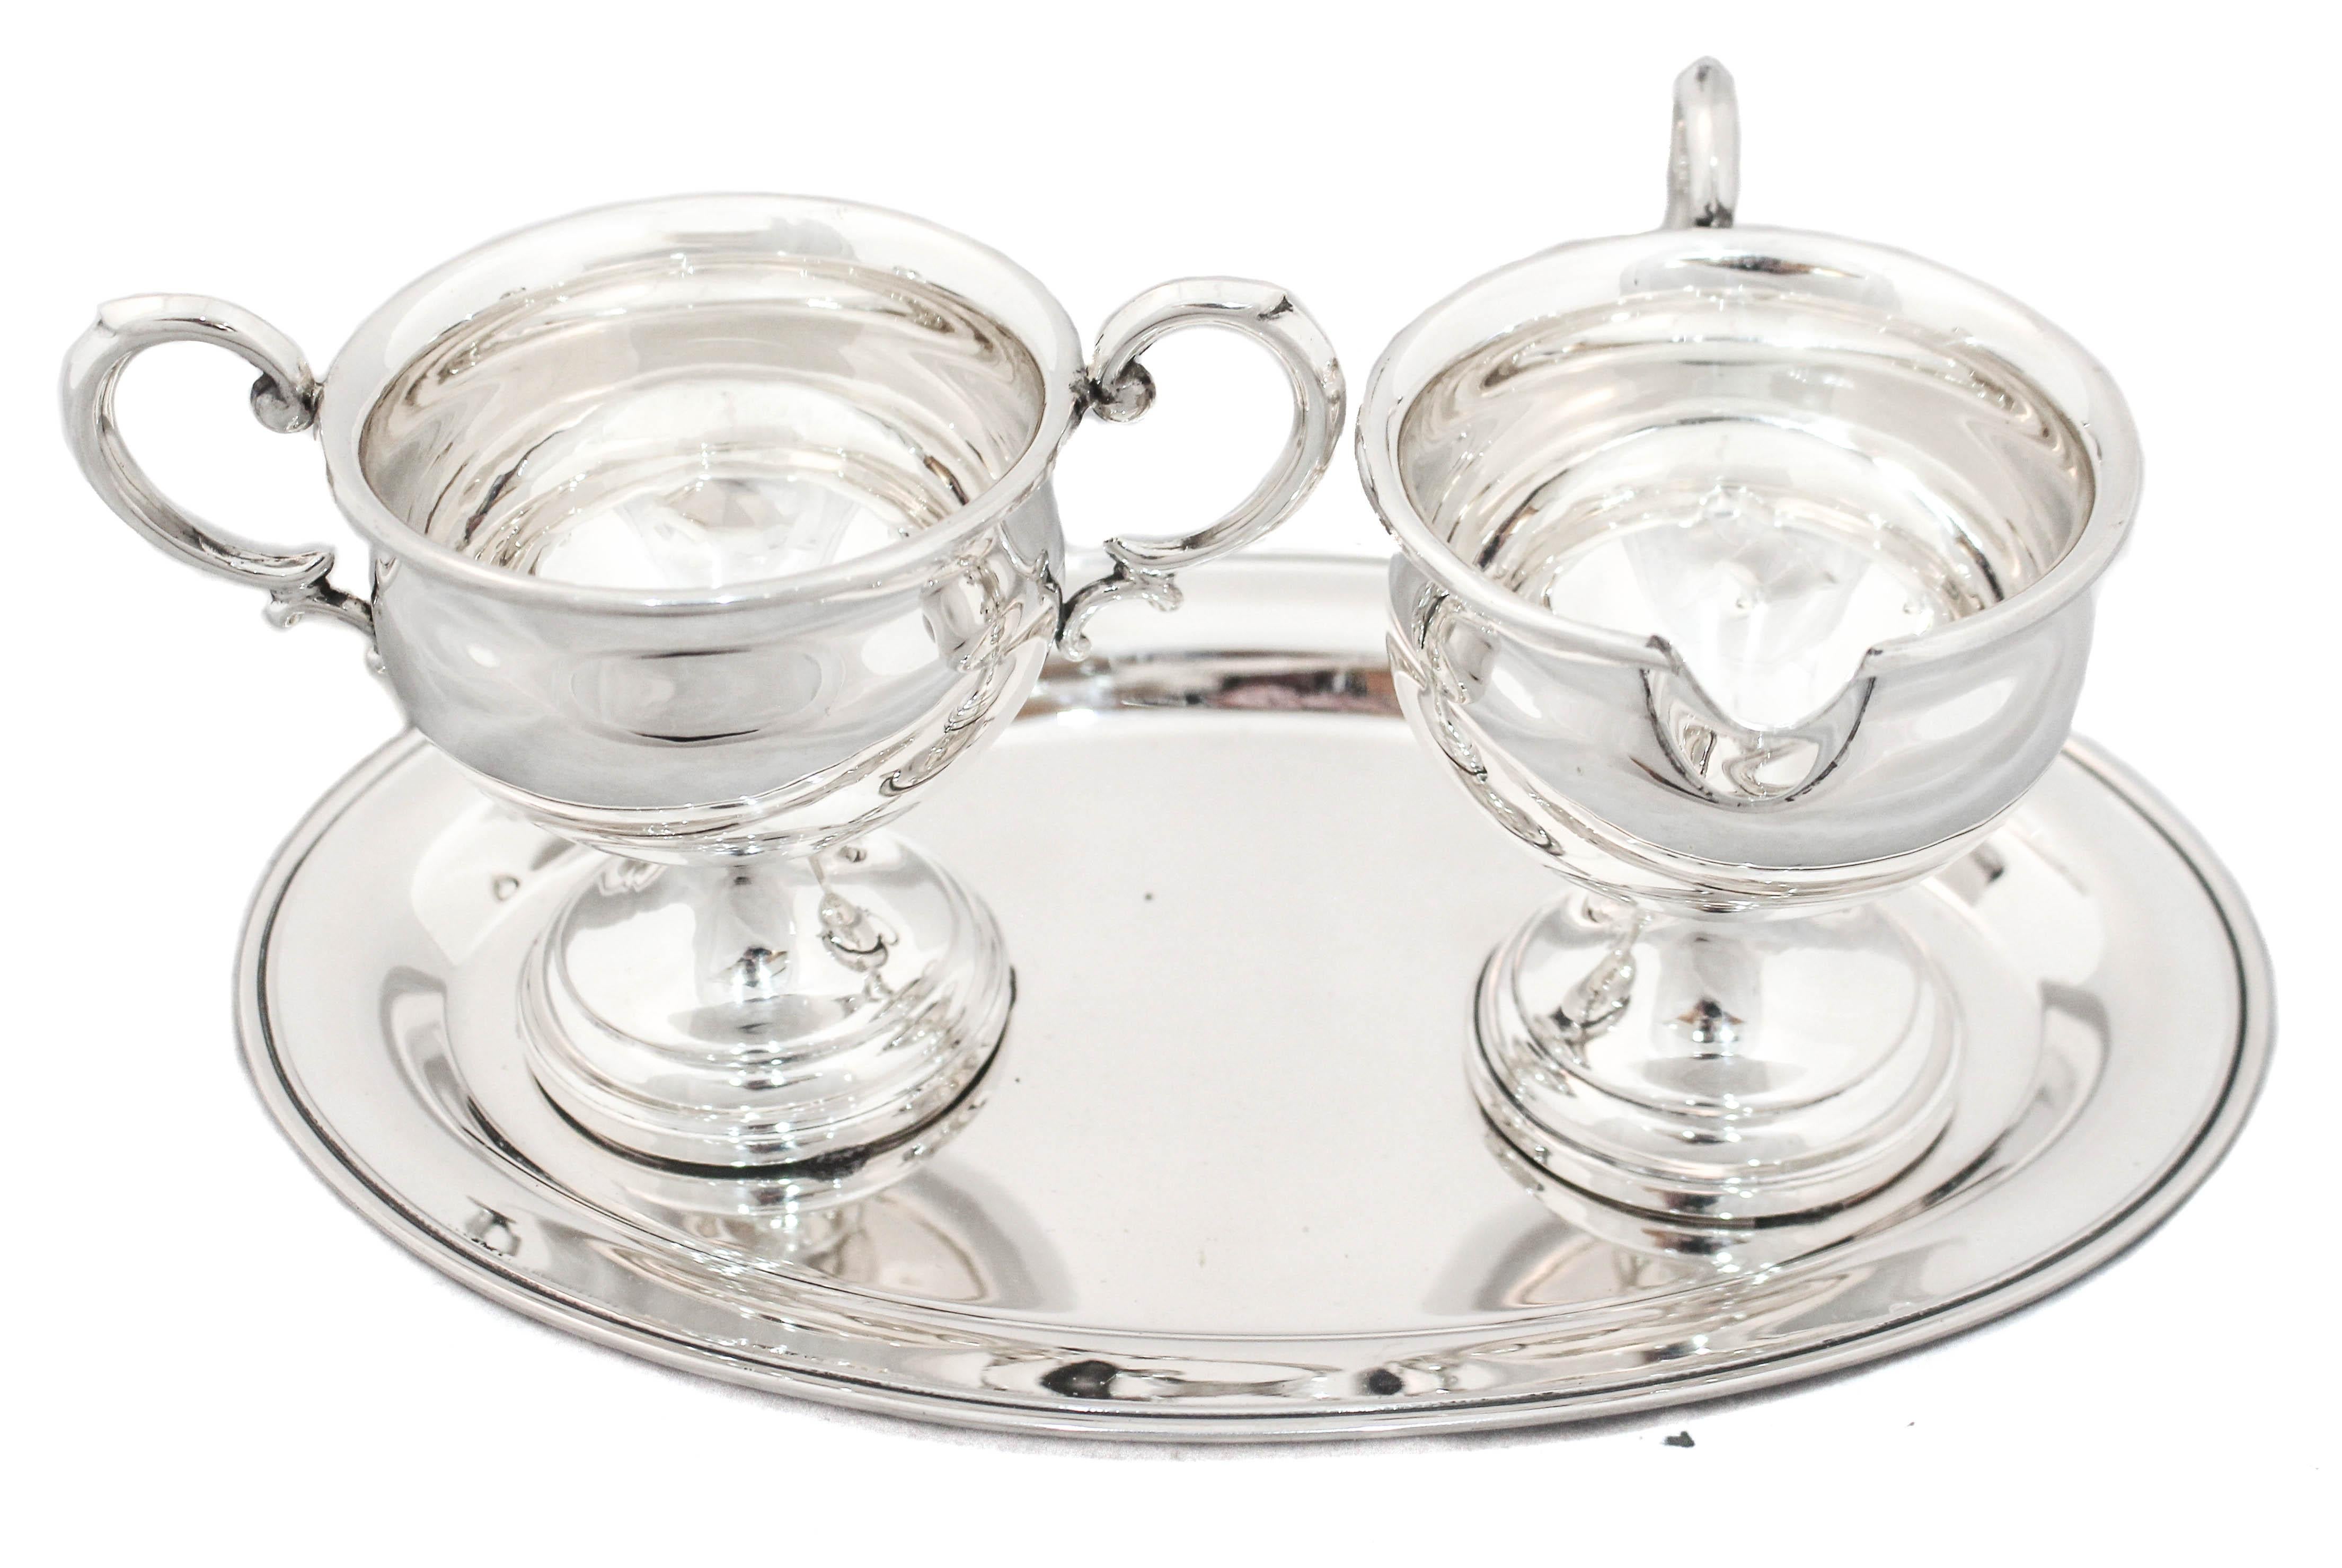 We are happy to offer you this sterling silver cream and sugar bowl with tray by M. Fred Hirsch Silver.  Designed and manufactured during WWII, it’s simplicity reflects that period; austere and understated.  Whether for yourself or while